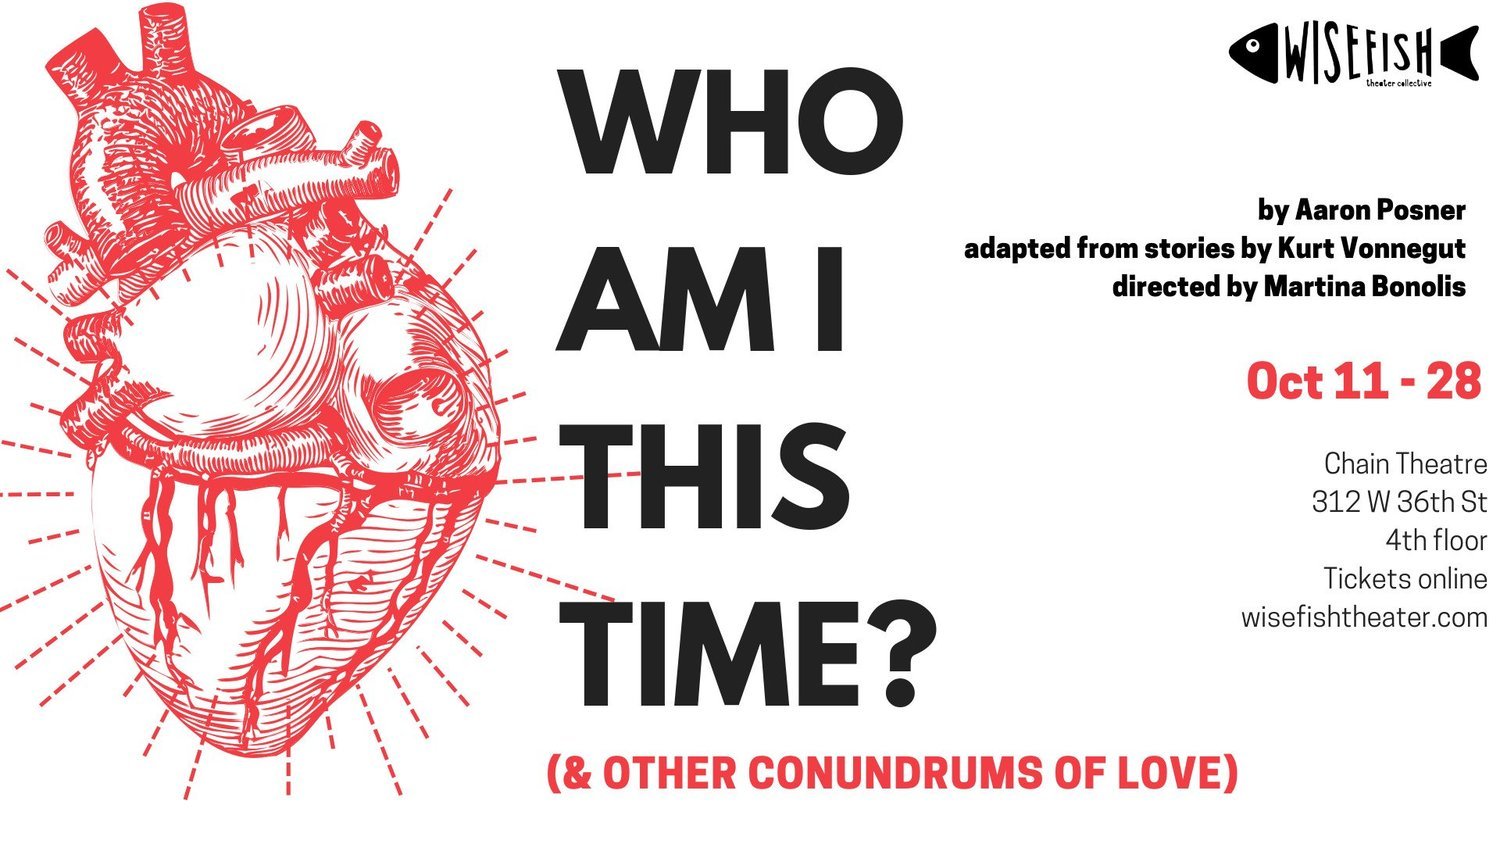 WHO AM I THIS TIME? By Aaron Posner Comes to Chain Theatre 